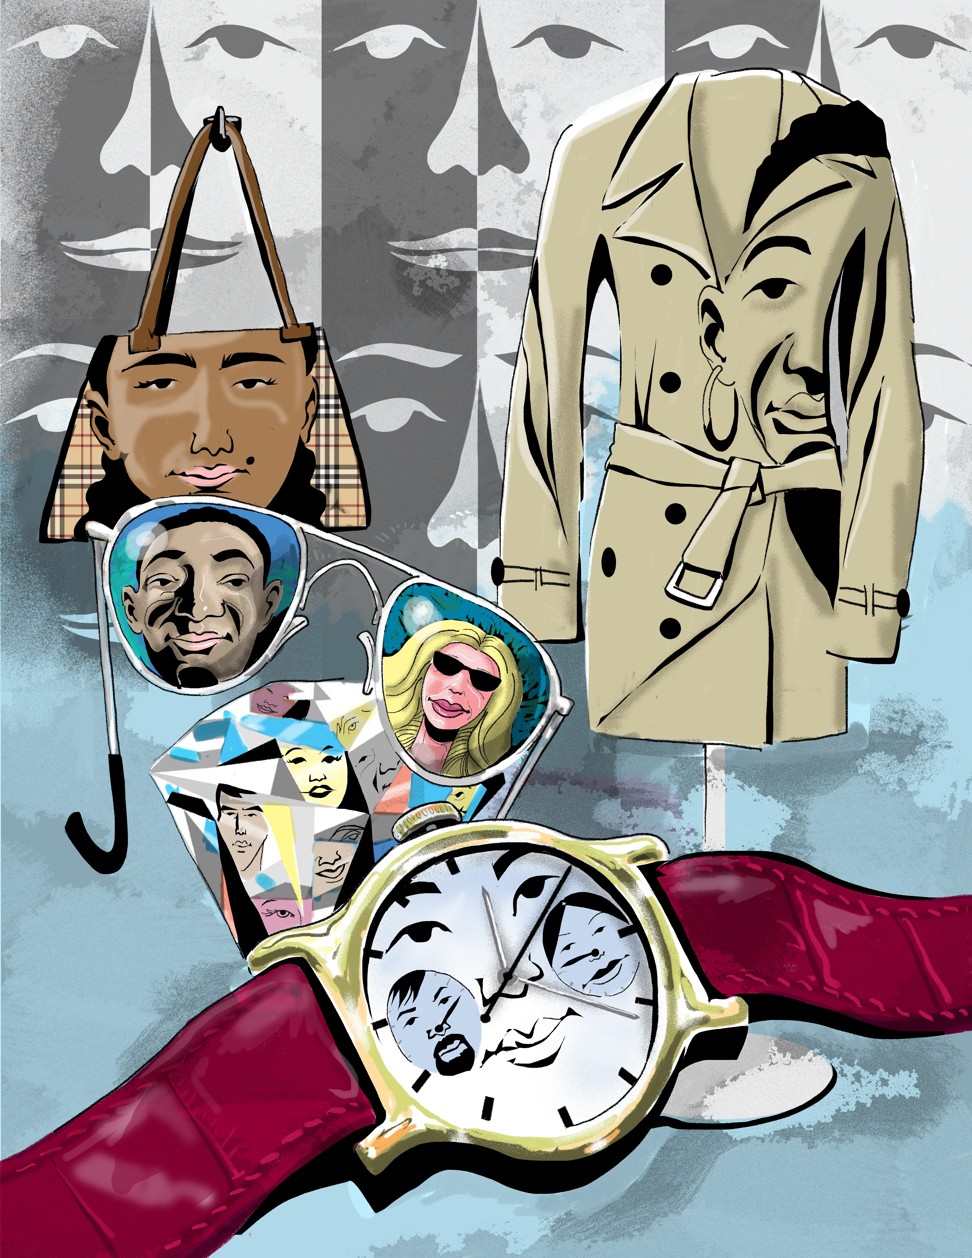 Many luxury fashion houses are hiring models and executives from different cultures in an effort to be truly global. Illustration: Craig Stephens